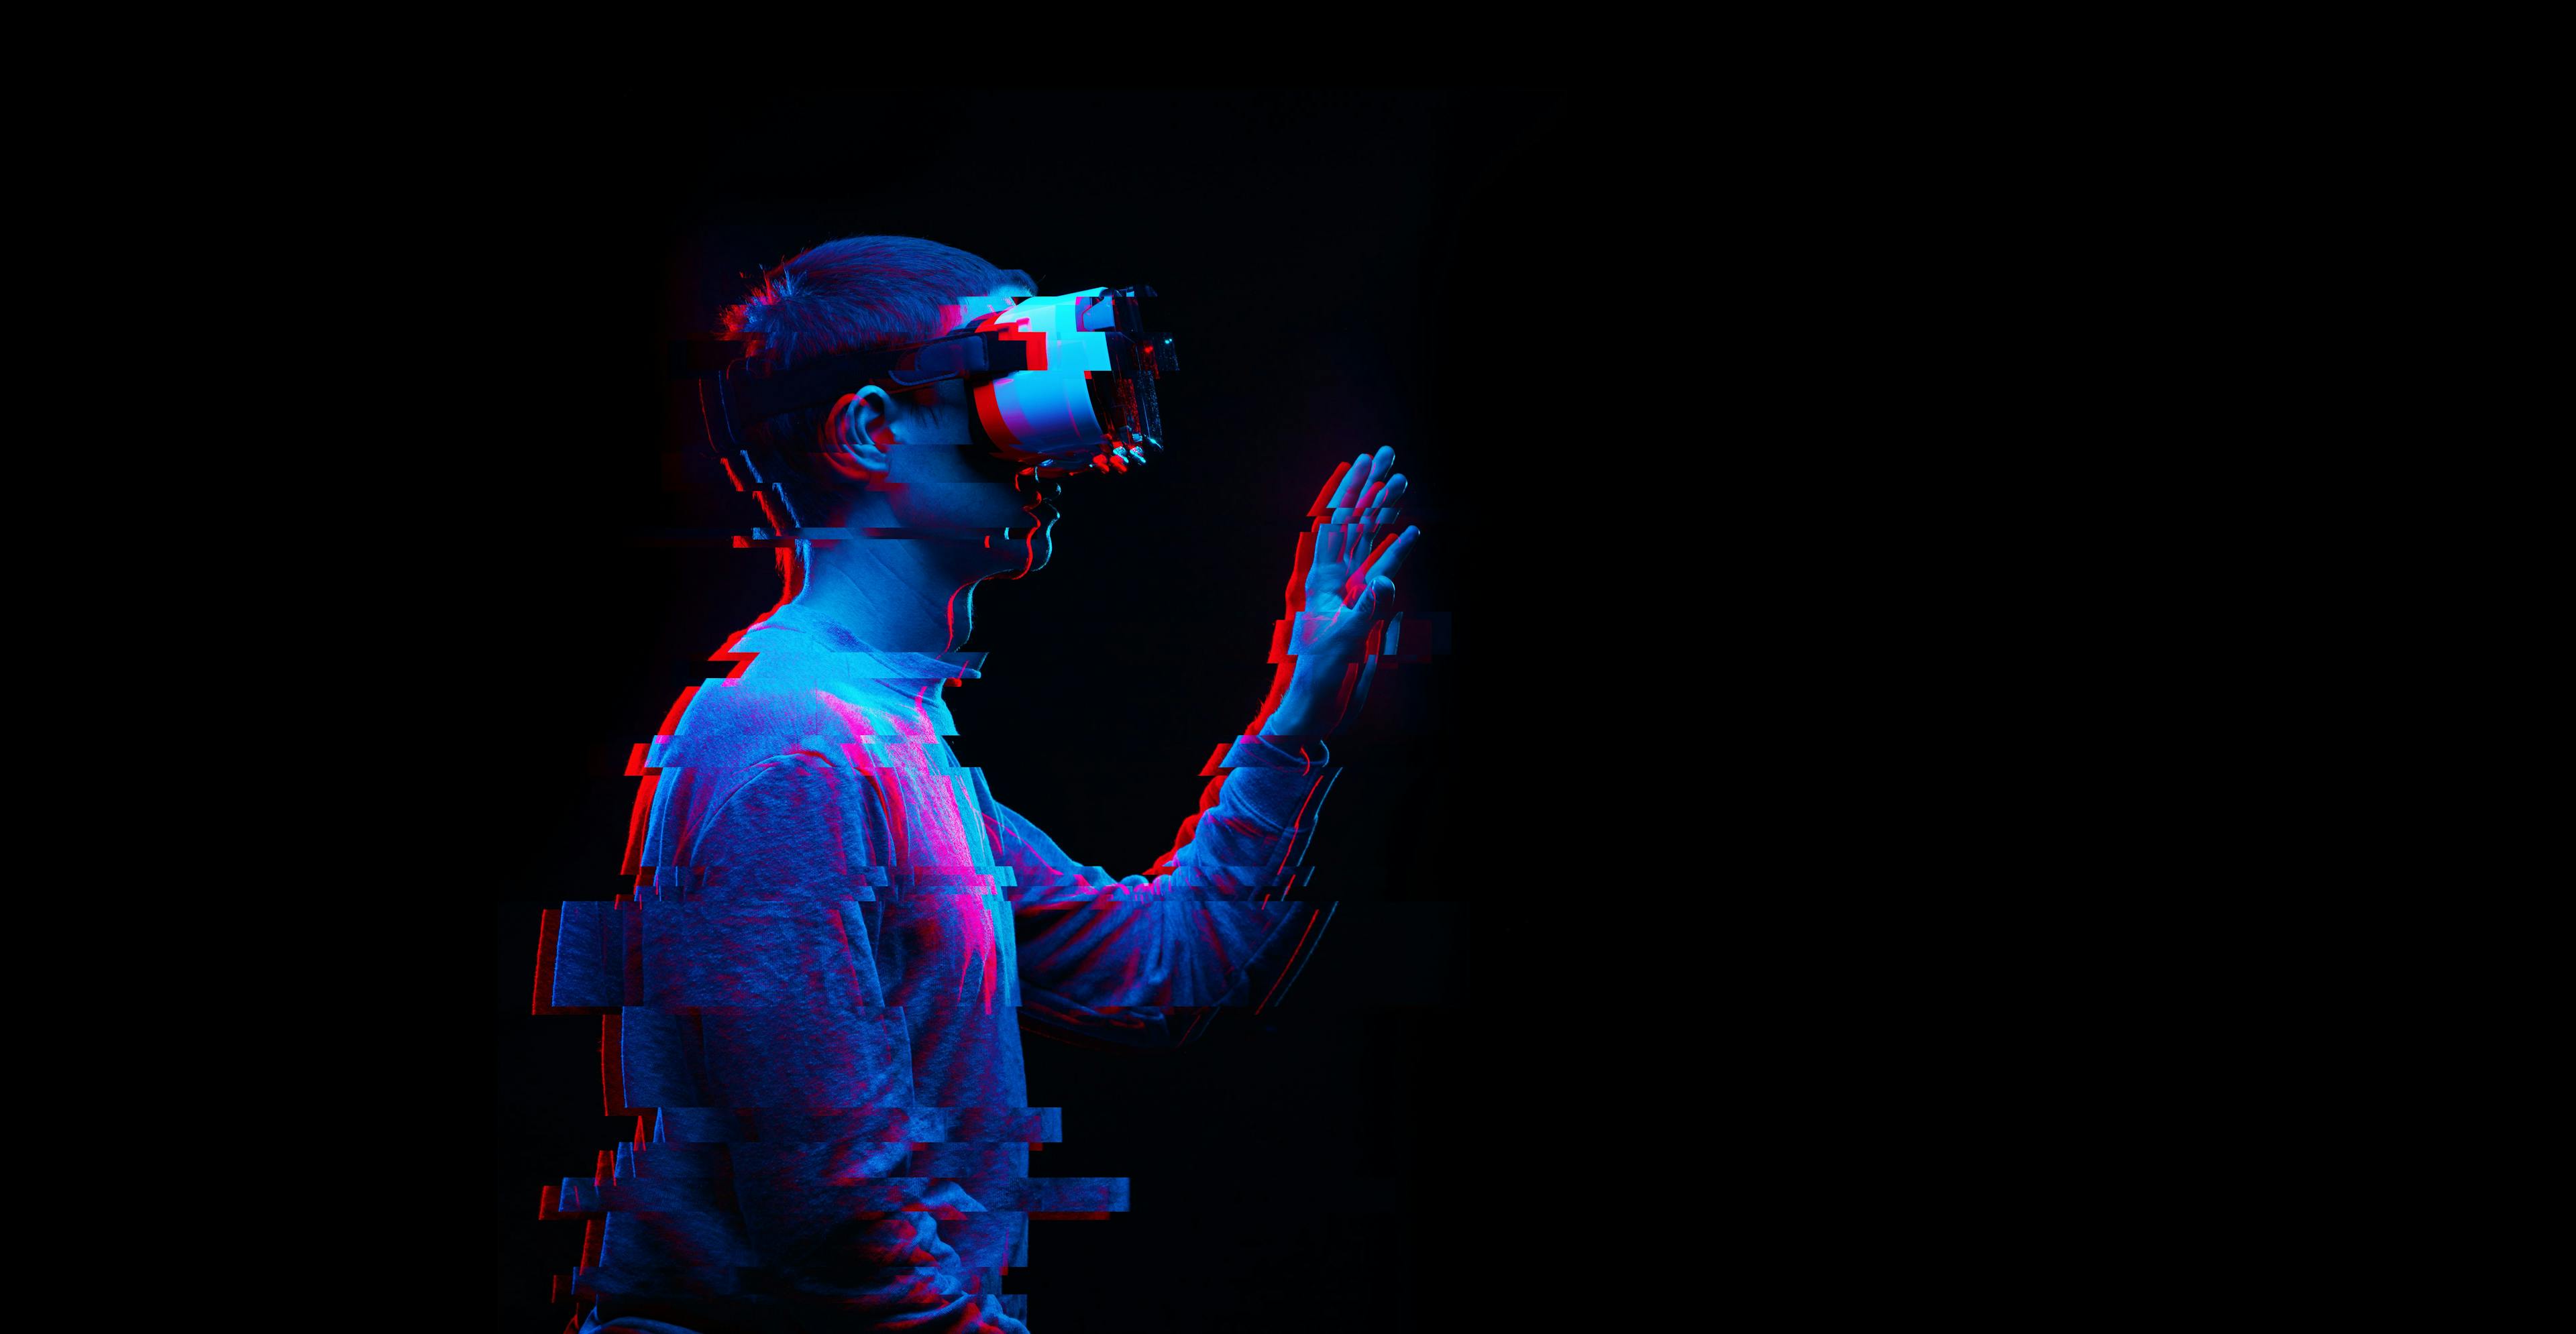 Virtual reality | Image Credit: nuclear_lily - stock.adobe.com